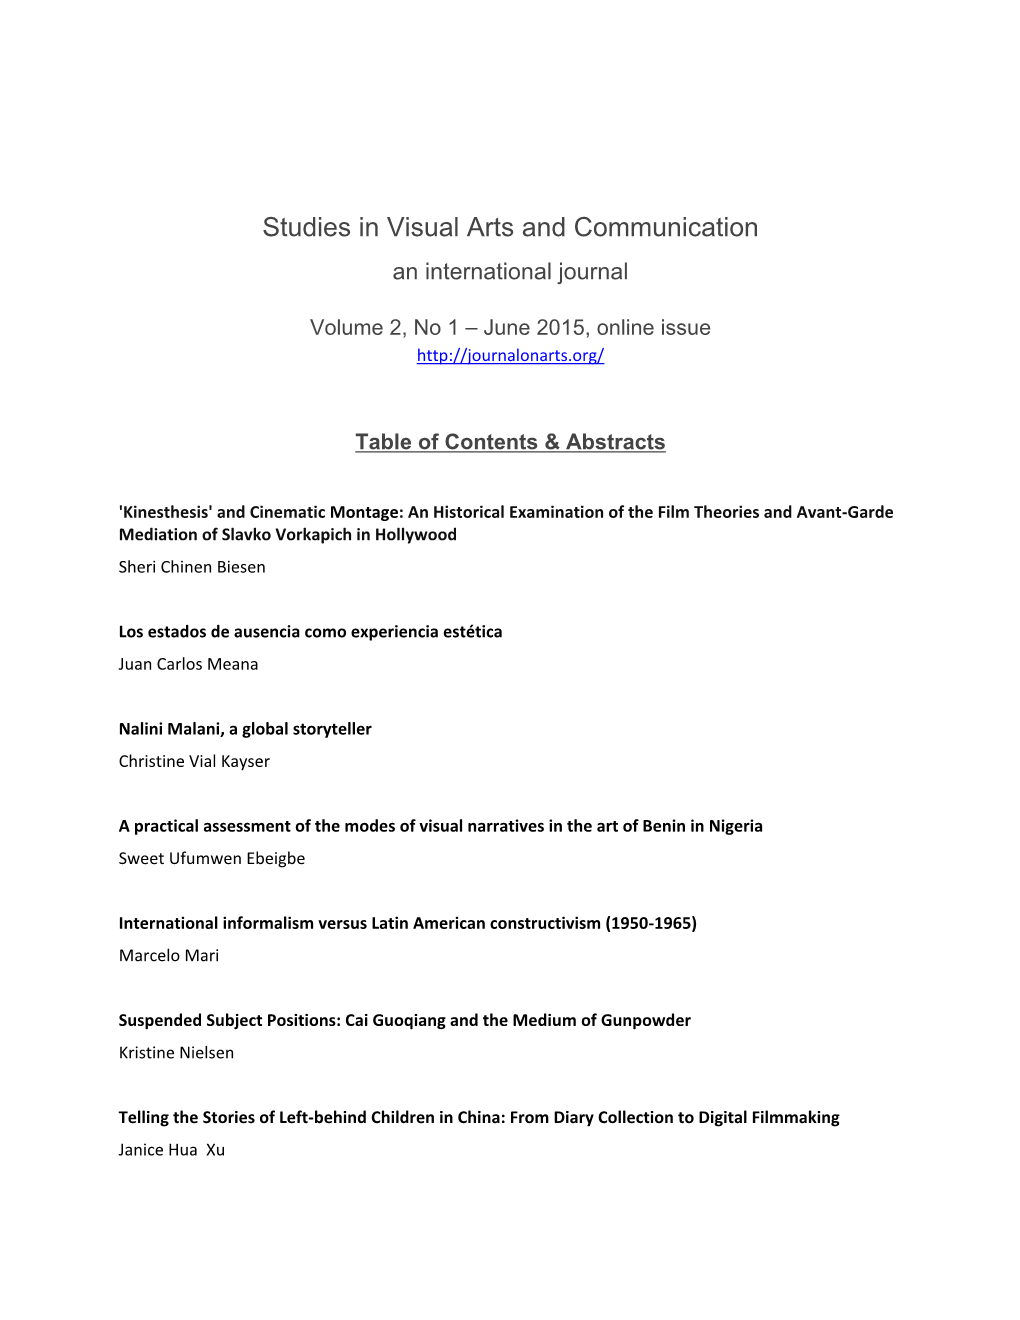 Studies in Visual Arts and Communication an International Journal